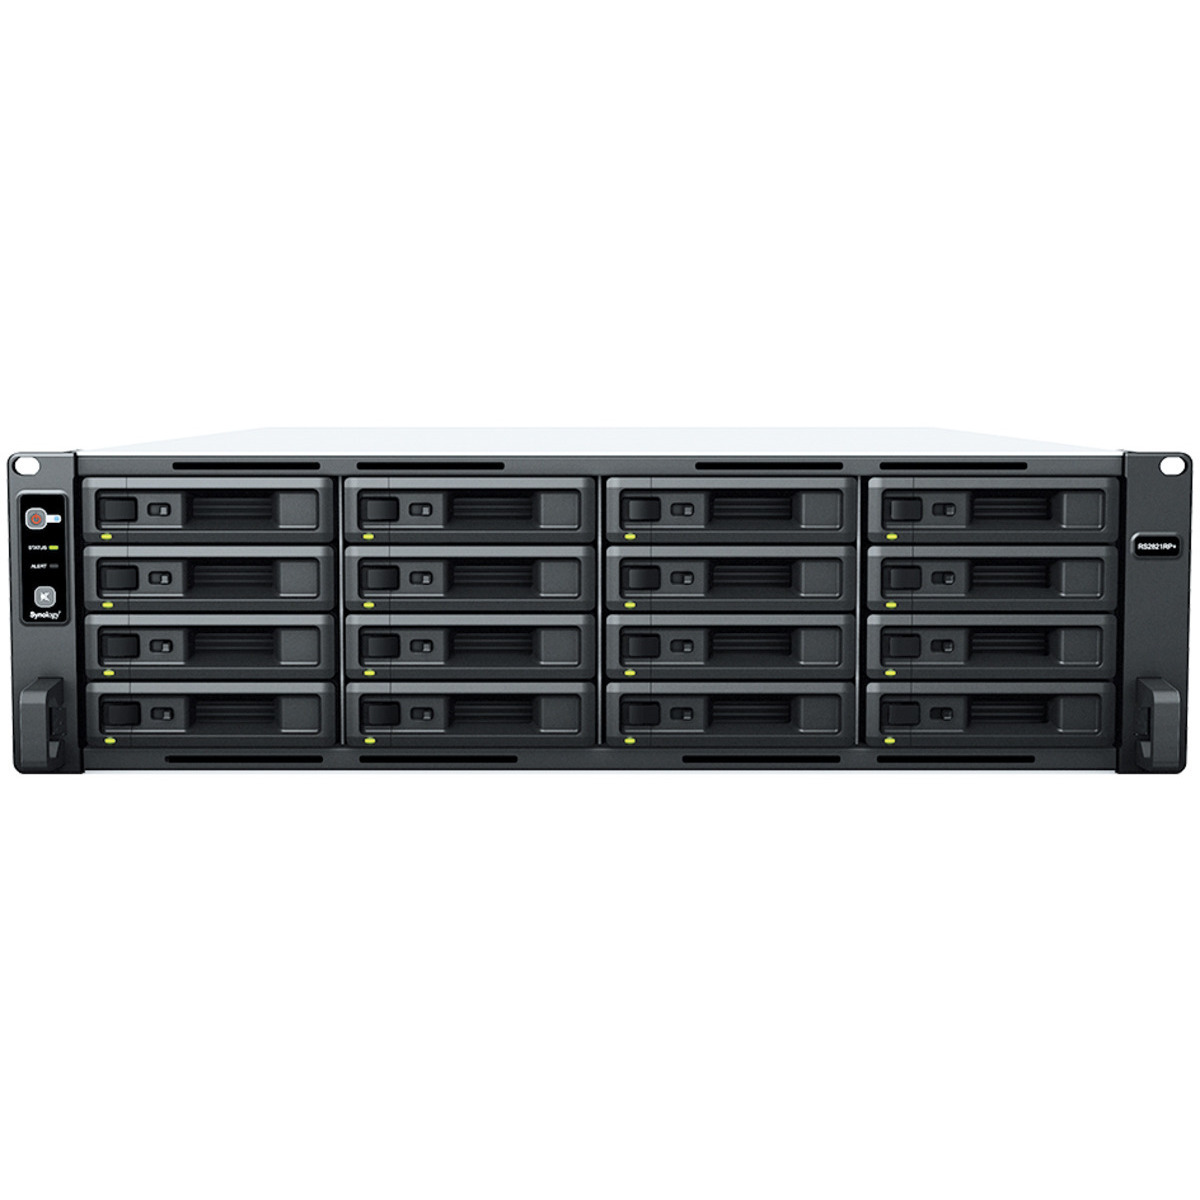 buy $6479 Synology RackStation RS2821RP+ 96tb RackMount NAS - Network Attached Storage Device 16x6000gb Western Digital Blue WD60EZAZ 3.5 5400rpm SATA 6Gb/s HDD CONSUMER Class Drives Installed - Burn-In Tested - nas headquarters buy network attached storage server device das new raid-5 free shipping usa christmas new year holiday sale RackStation RS2821RP+